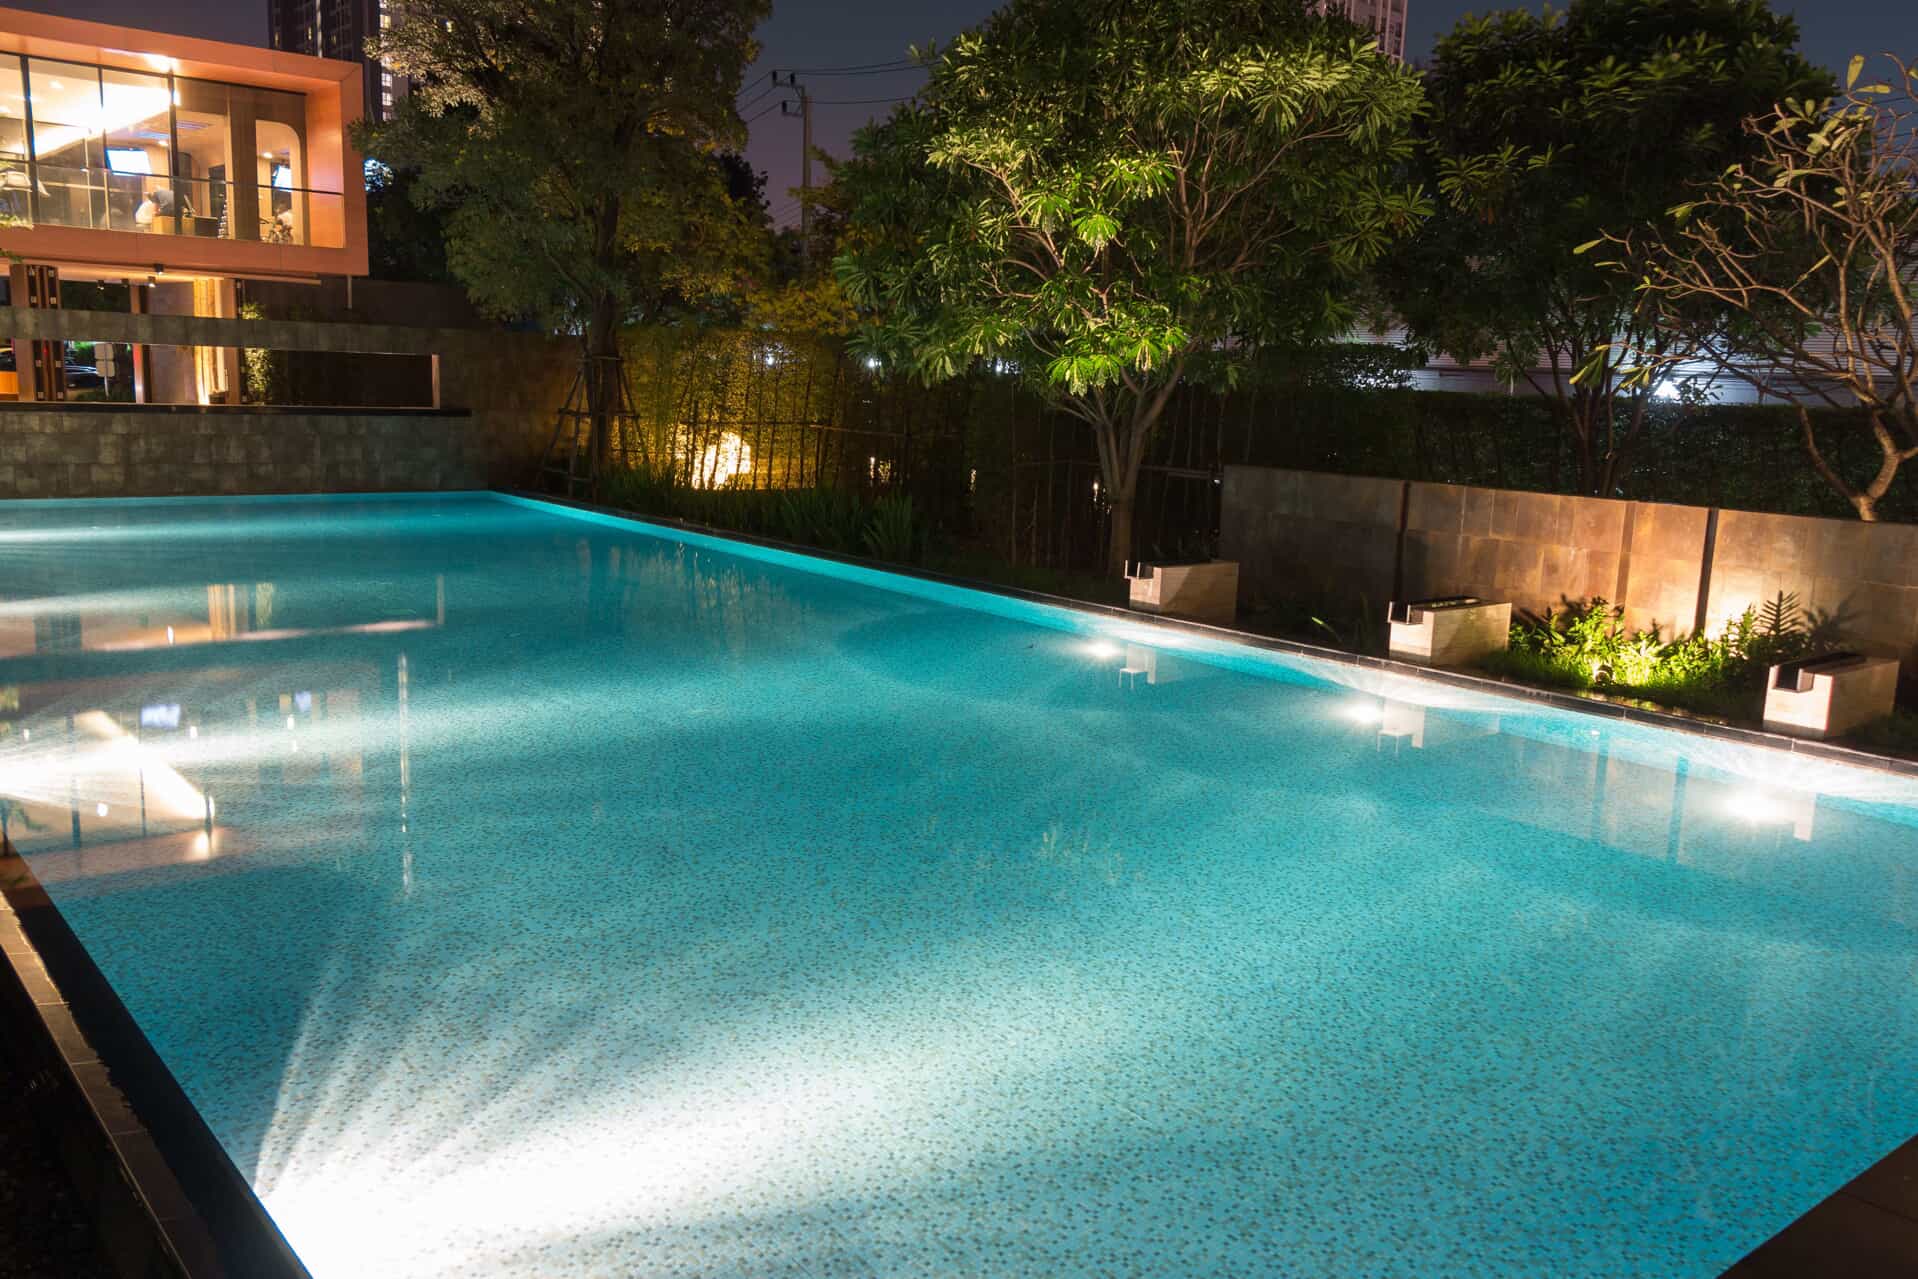 Looking for a Pool Light Installation?